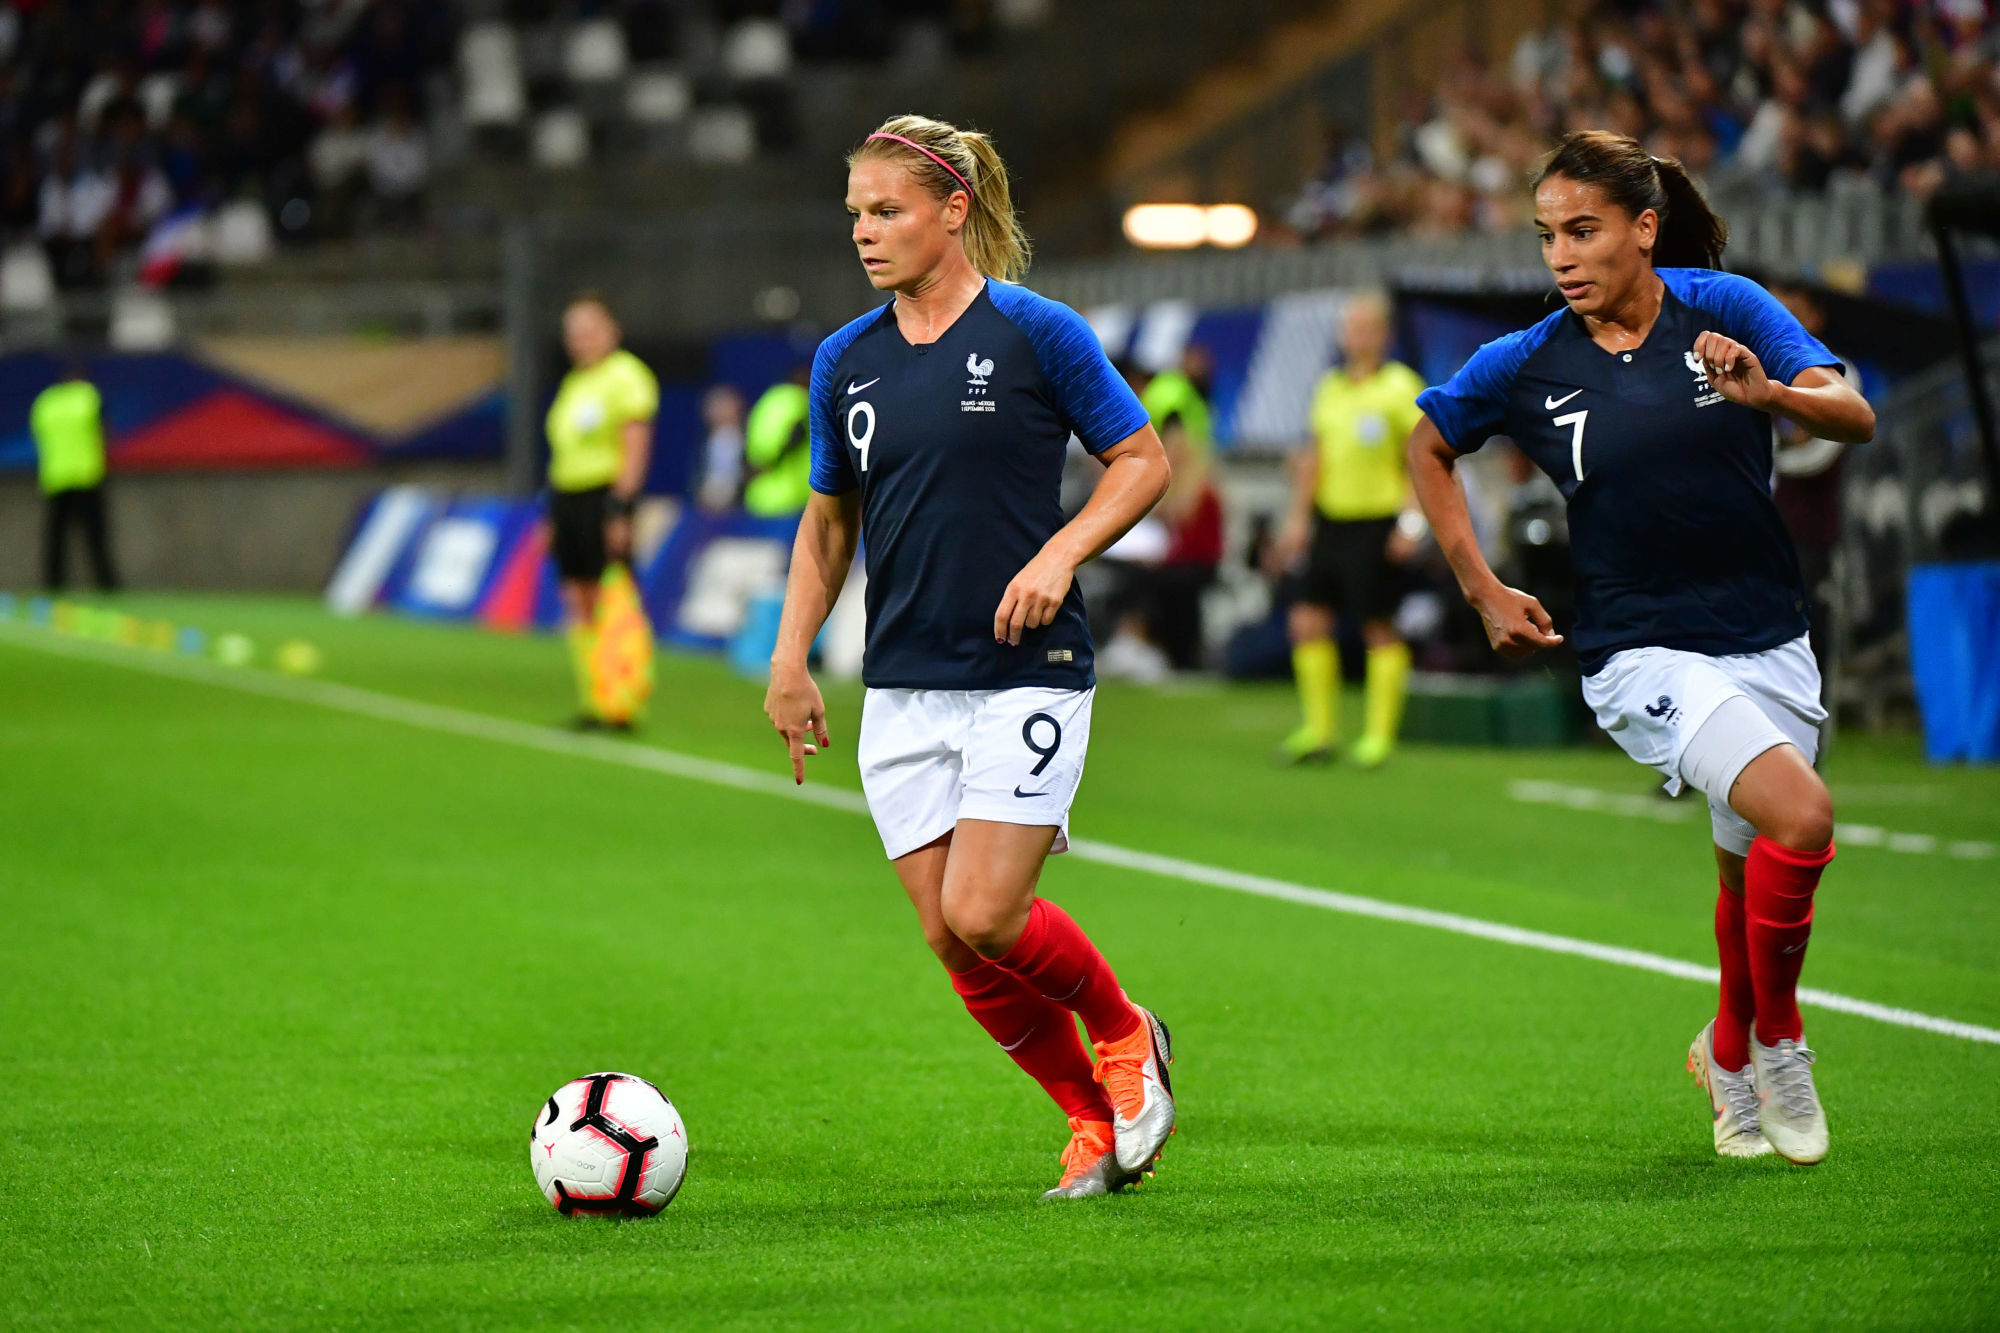 (L-R) Eugenie Le Sommer of France and Amel Majri of France during the Women's friendly international match between France and Mexico on September 1, 2018 in Amiens, France. (Photo by Dave Winter/Icon Sport)